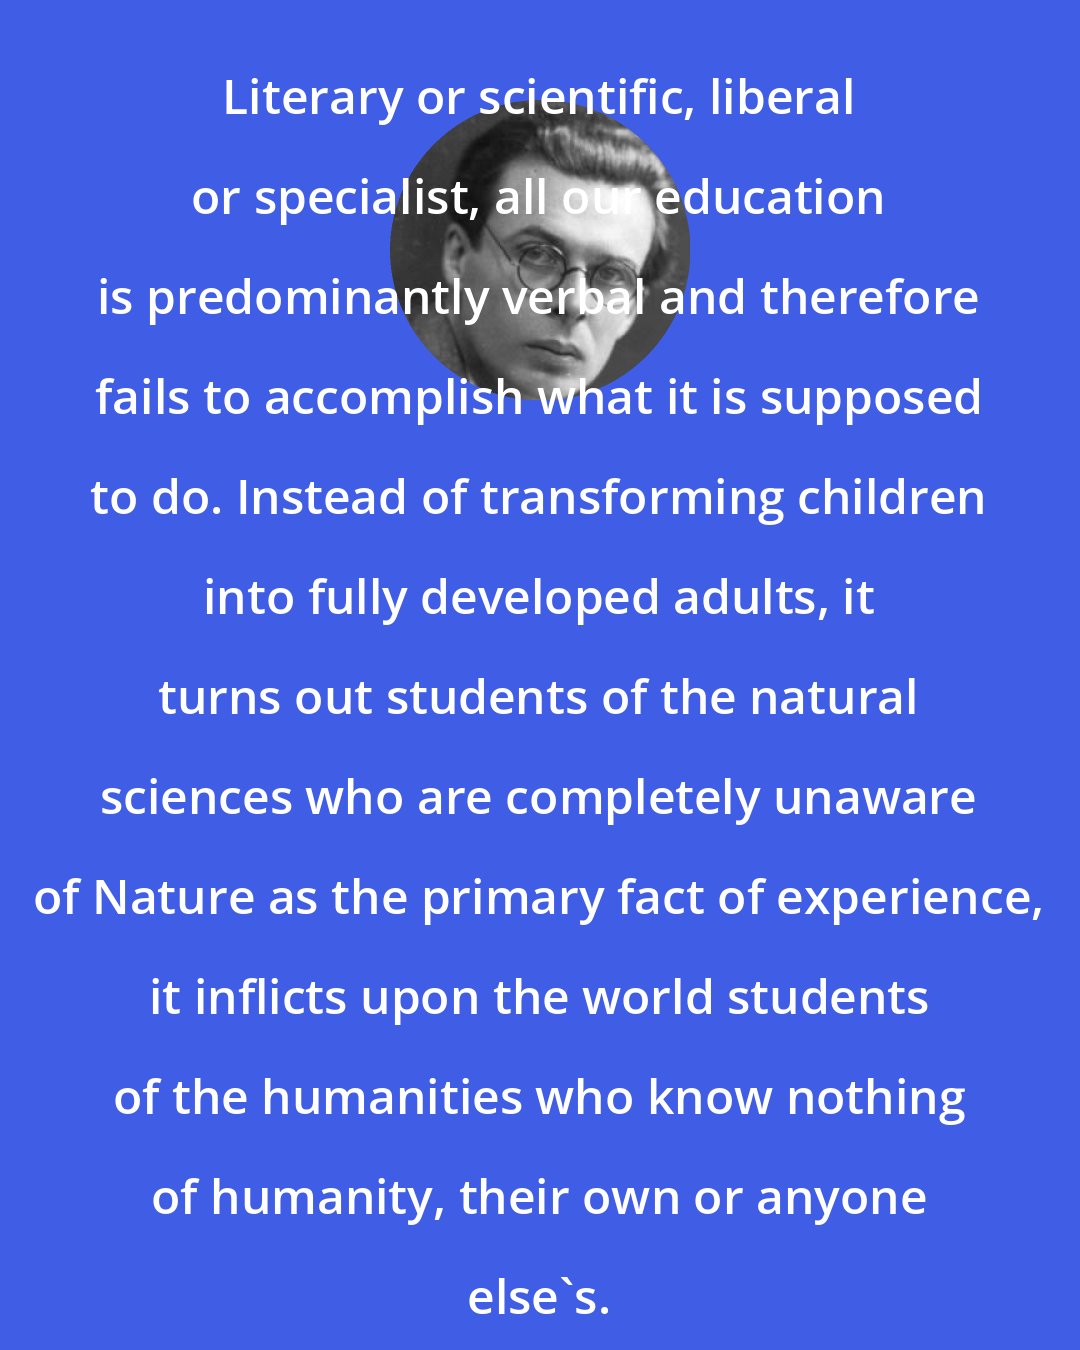 Aldous Huxley: Literary or scientific, liberal or specialist, all our education is predominantly verbal and therefore fails to accomplish what it is supposed to do. Instead of transforming children into fully developed adults, it turns out students of the natural sciences who are completely unaware of Nature as the primary fact of experience, it inflicts upon the world students of the humanities who know nothing of humanity, their own or anyone else's.